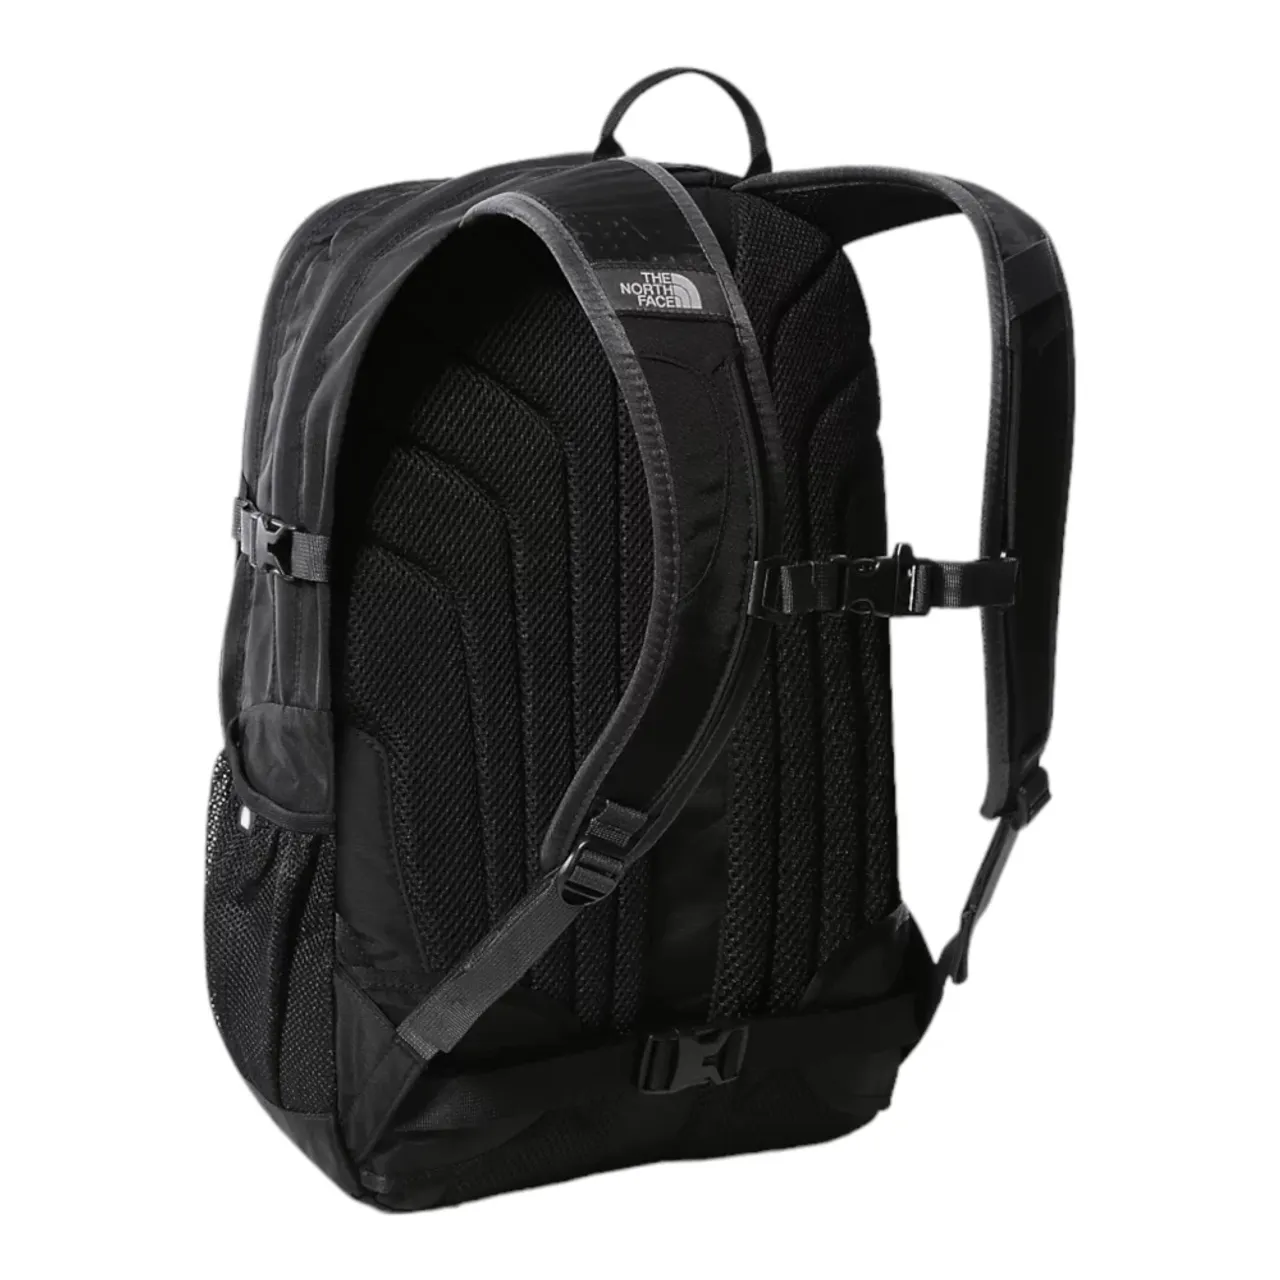 The North Face , Black Bags Collection ,Black unisex, Sizes: ONE SIZE